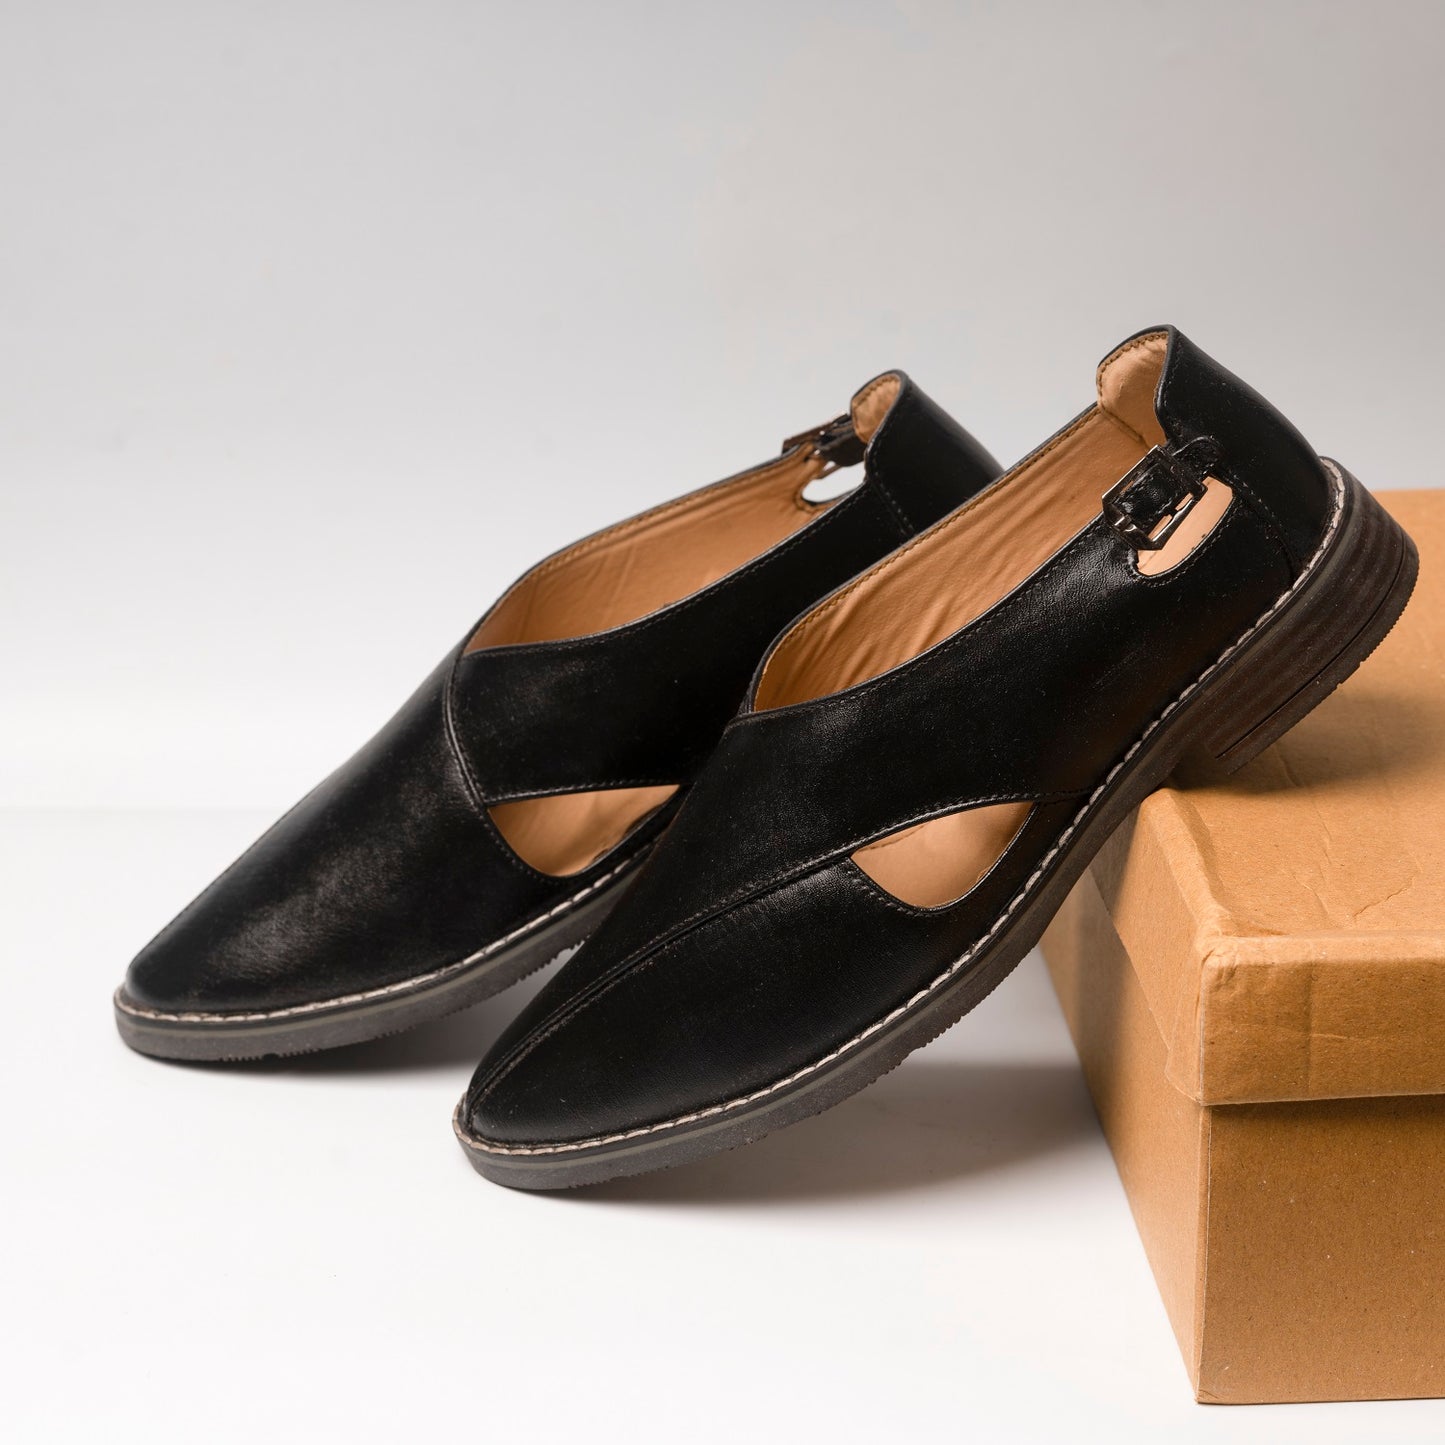 The Aurous Handcrafted Criss Cross Formal Peshawari Shoes - Black